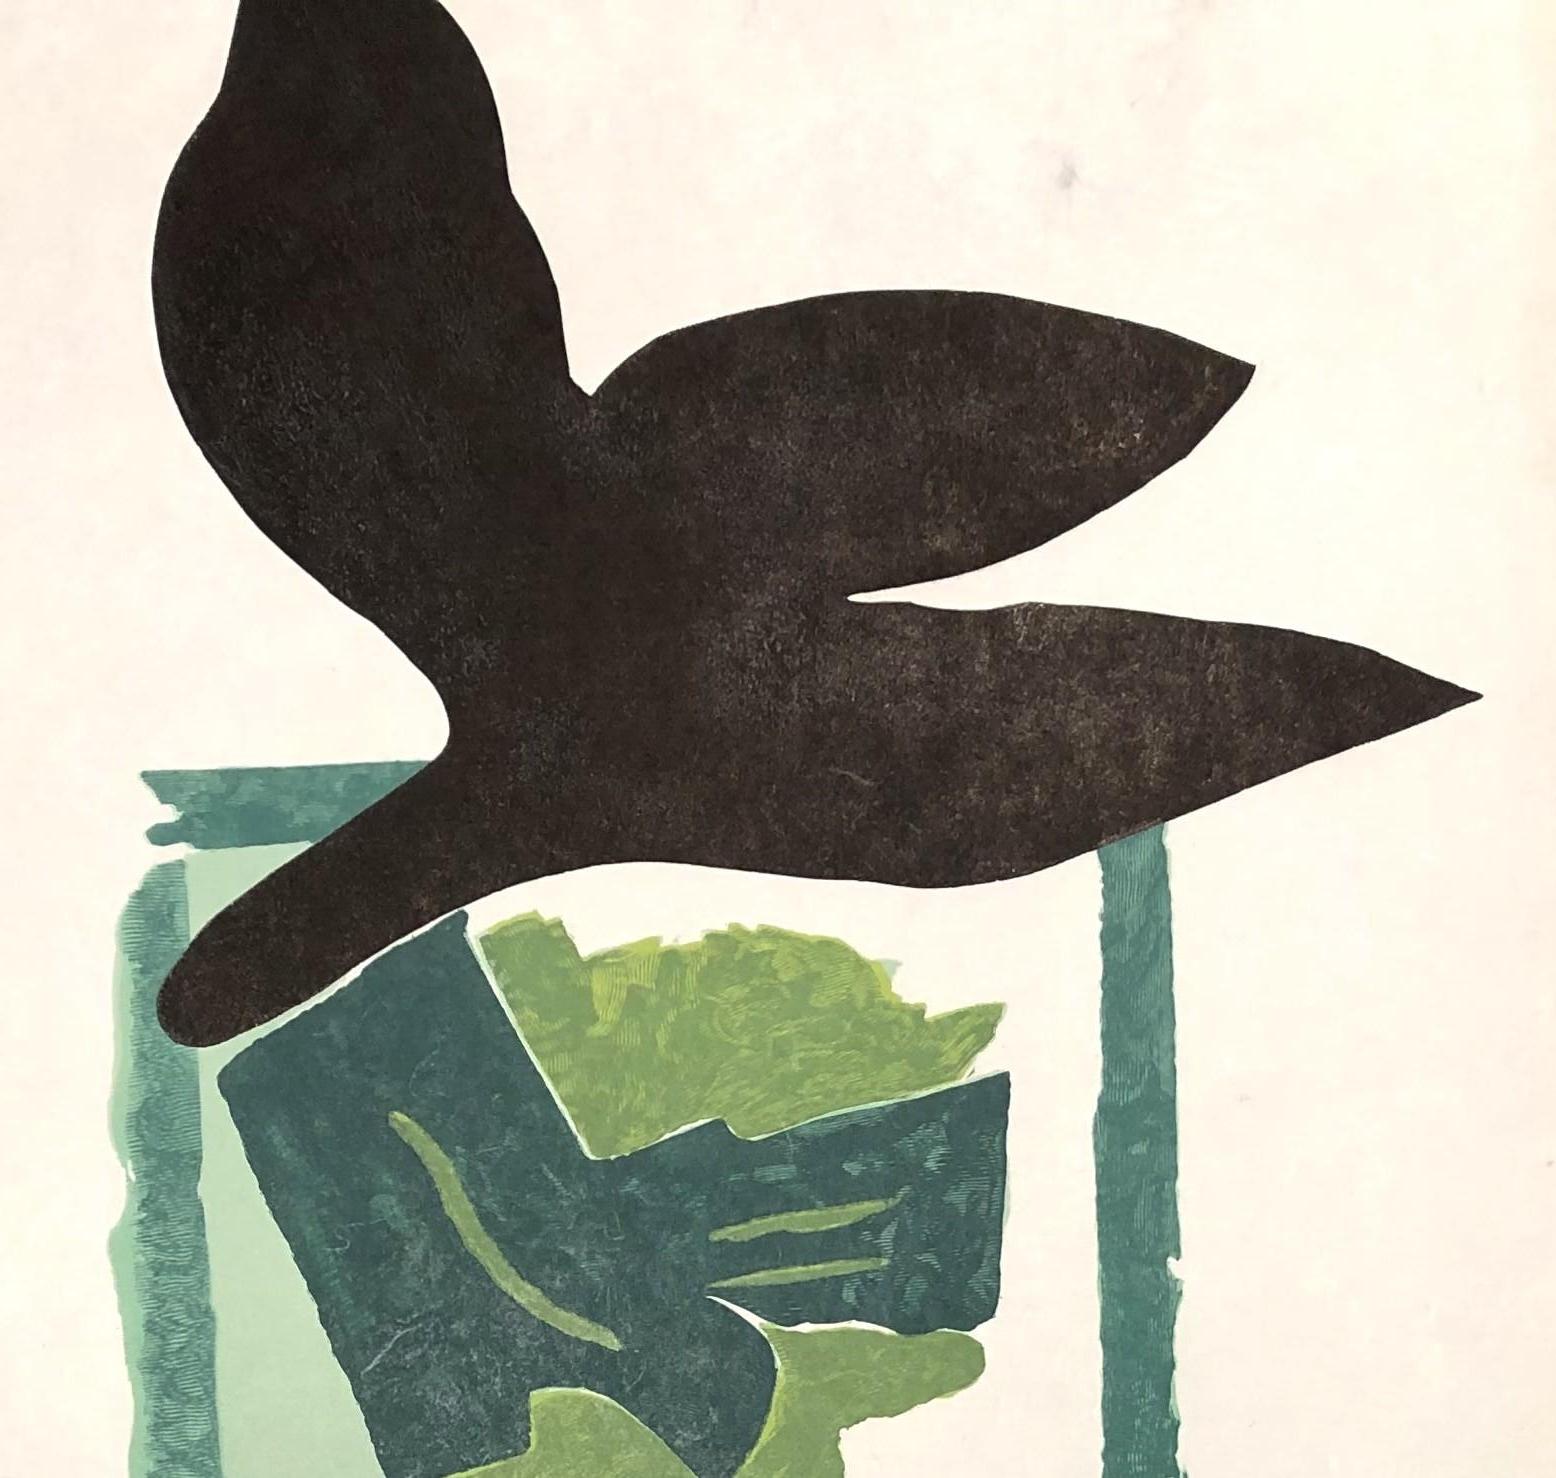 Black Bird On Green Background - Original woodcut handsigned - 50 copies - Print by Georges Braque